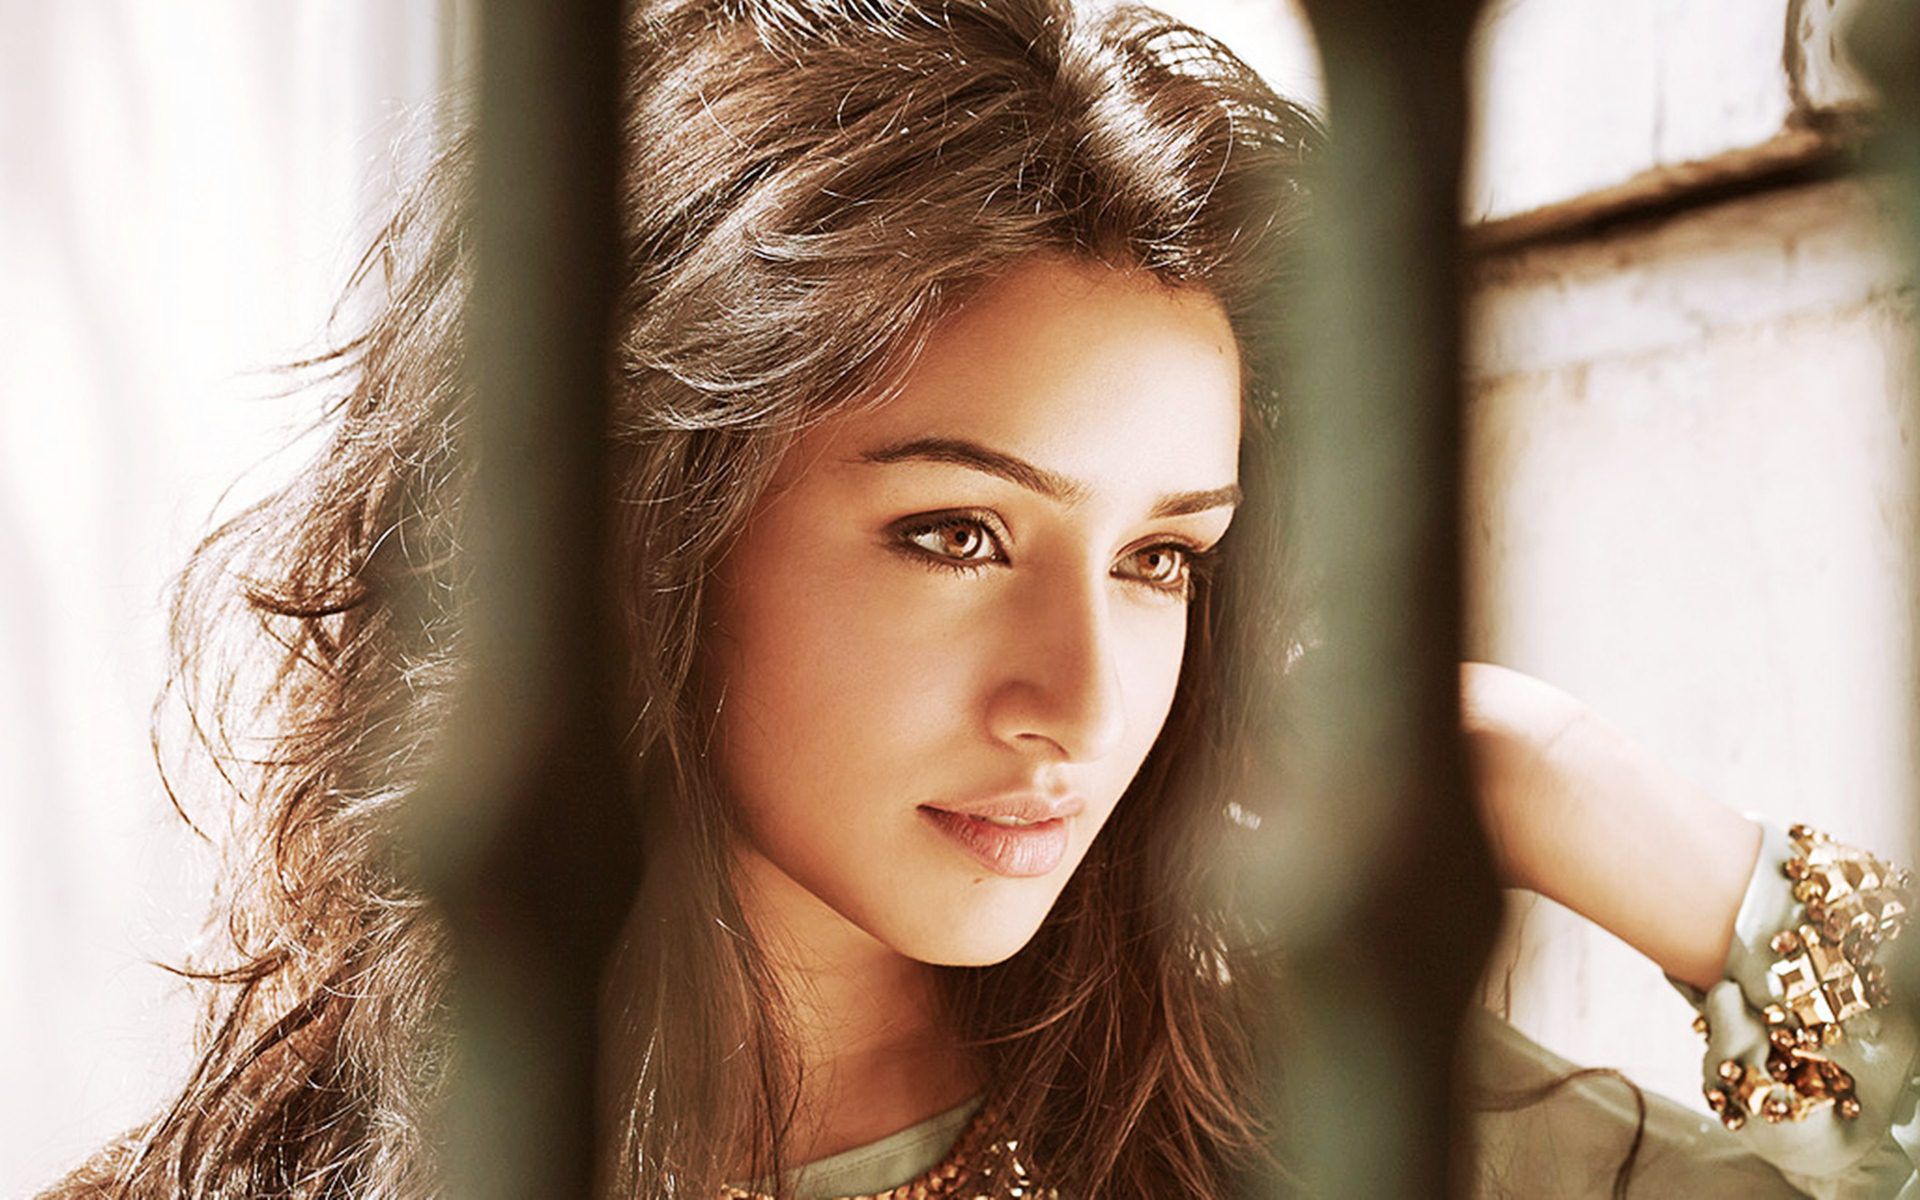 Shraddha Kapoor Wallpapers Images Photos Pictures Backgrounds